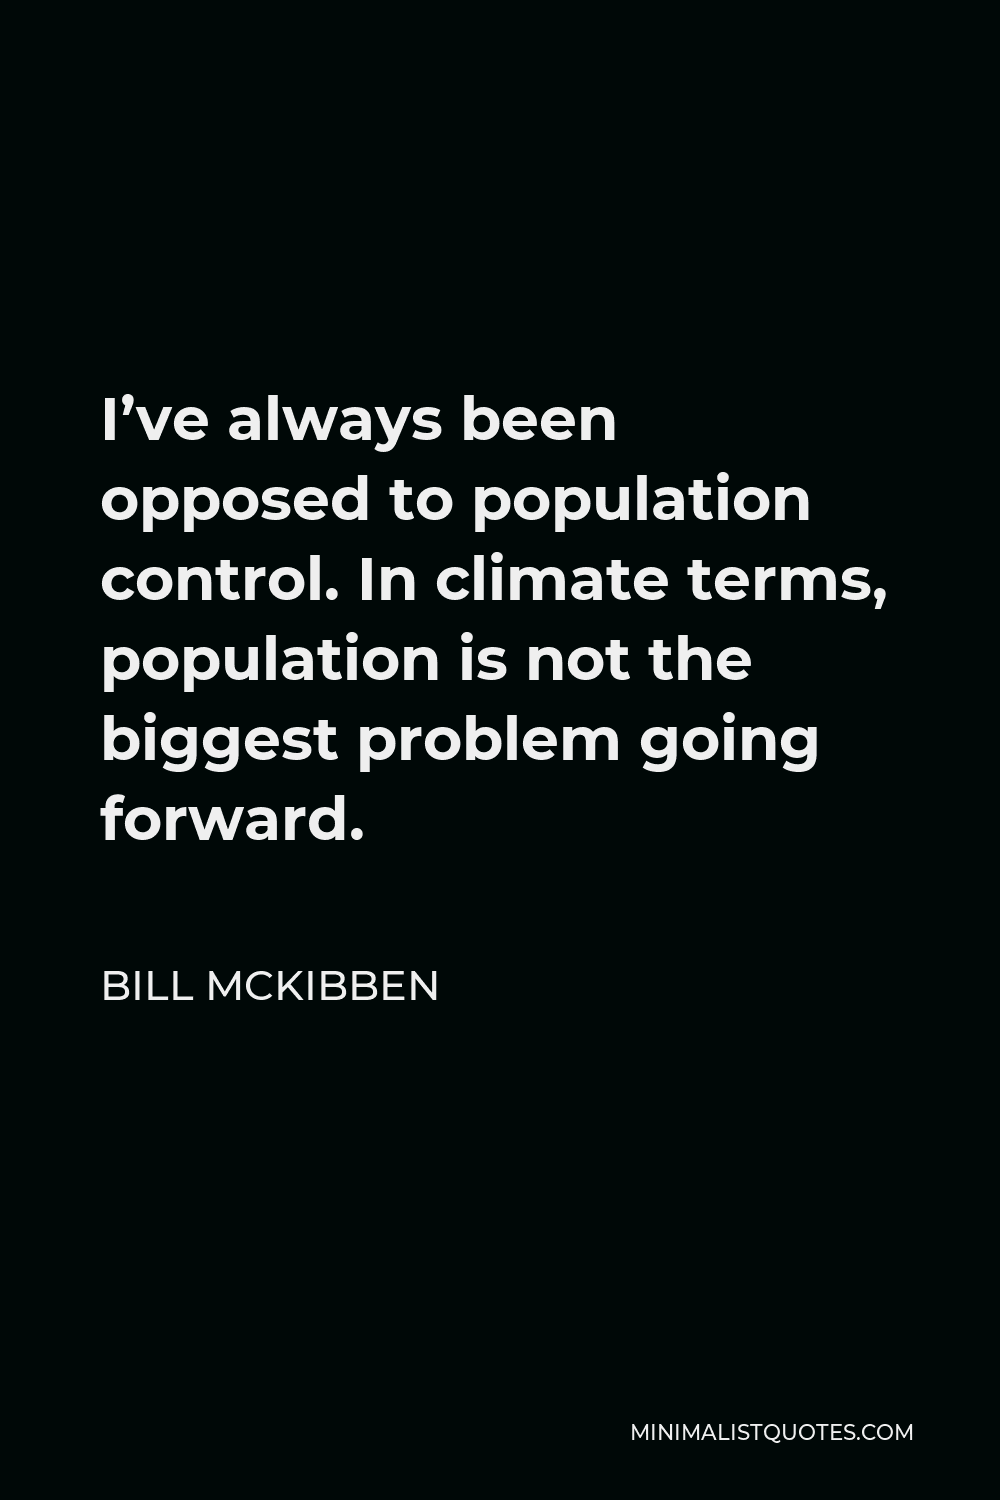 Bill McKibben Quote - I’ve always been opposed to population control. In climate terms, population is not the biggest problem going forward.